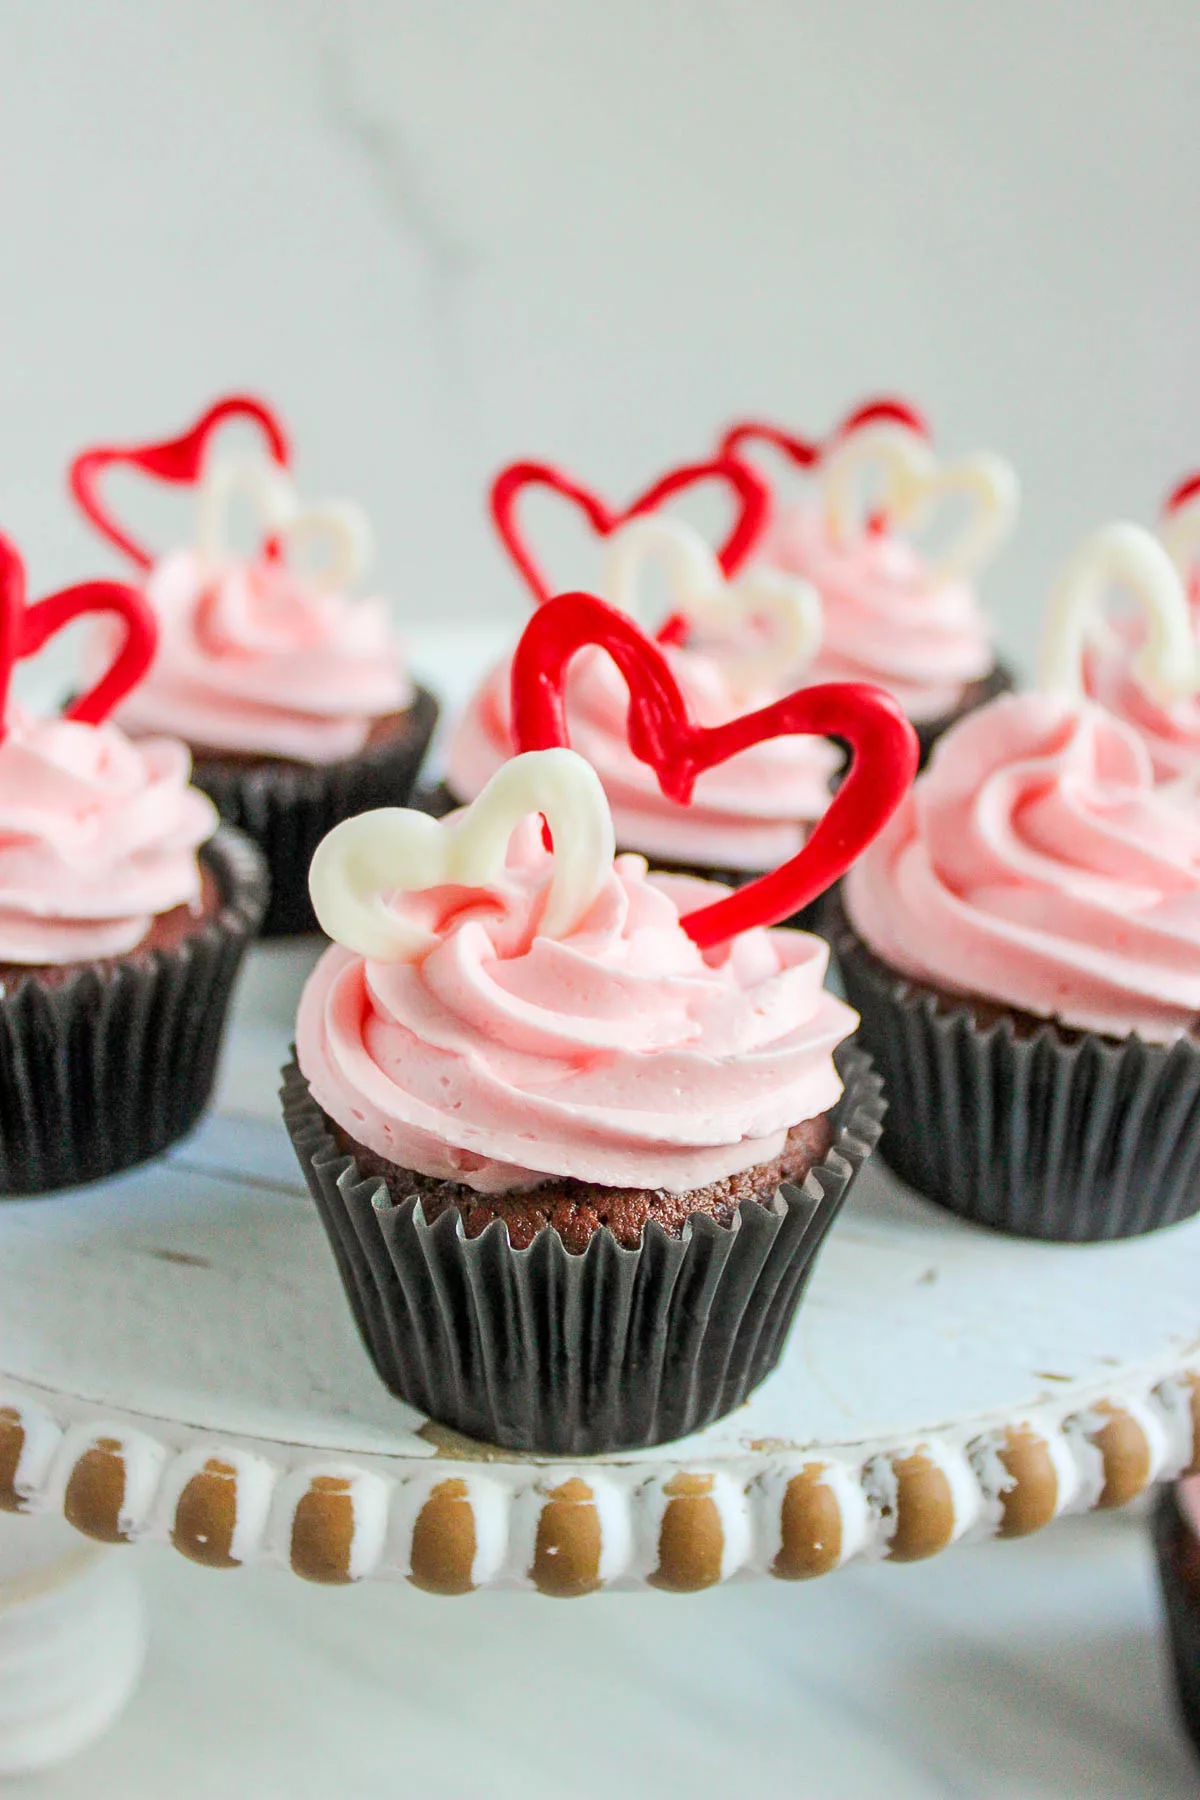 Chocolate cupcakes with pink buttercream frosting 